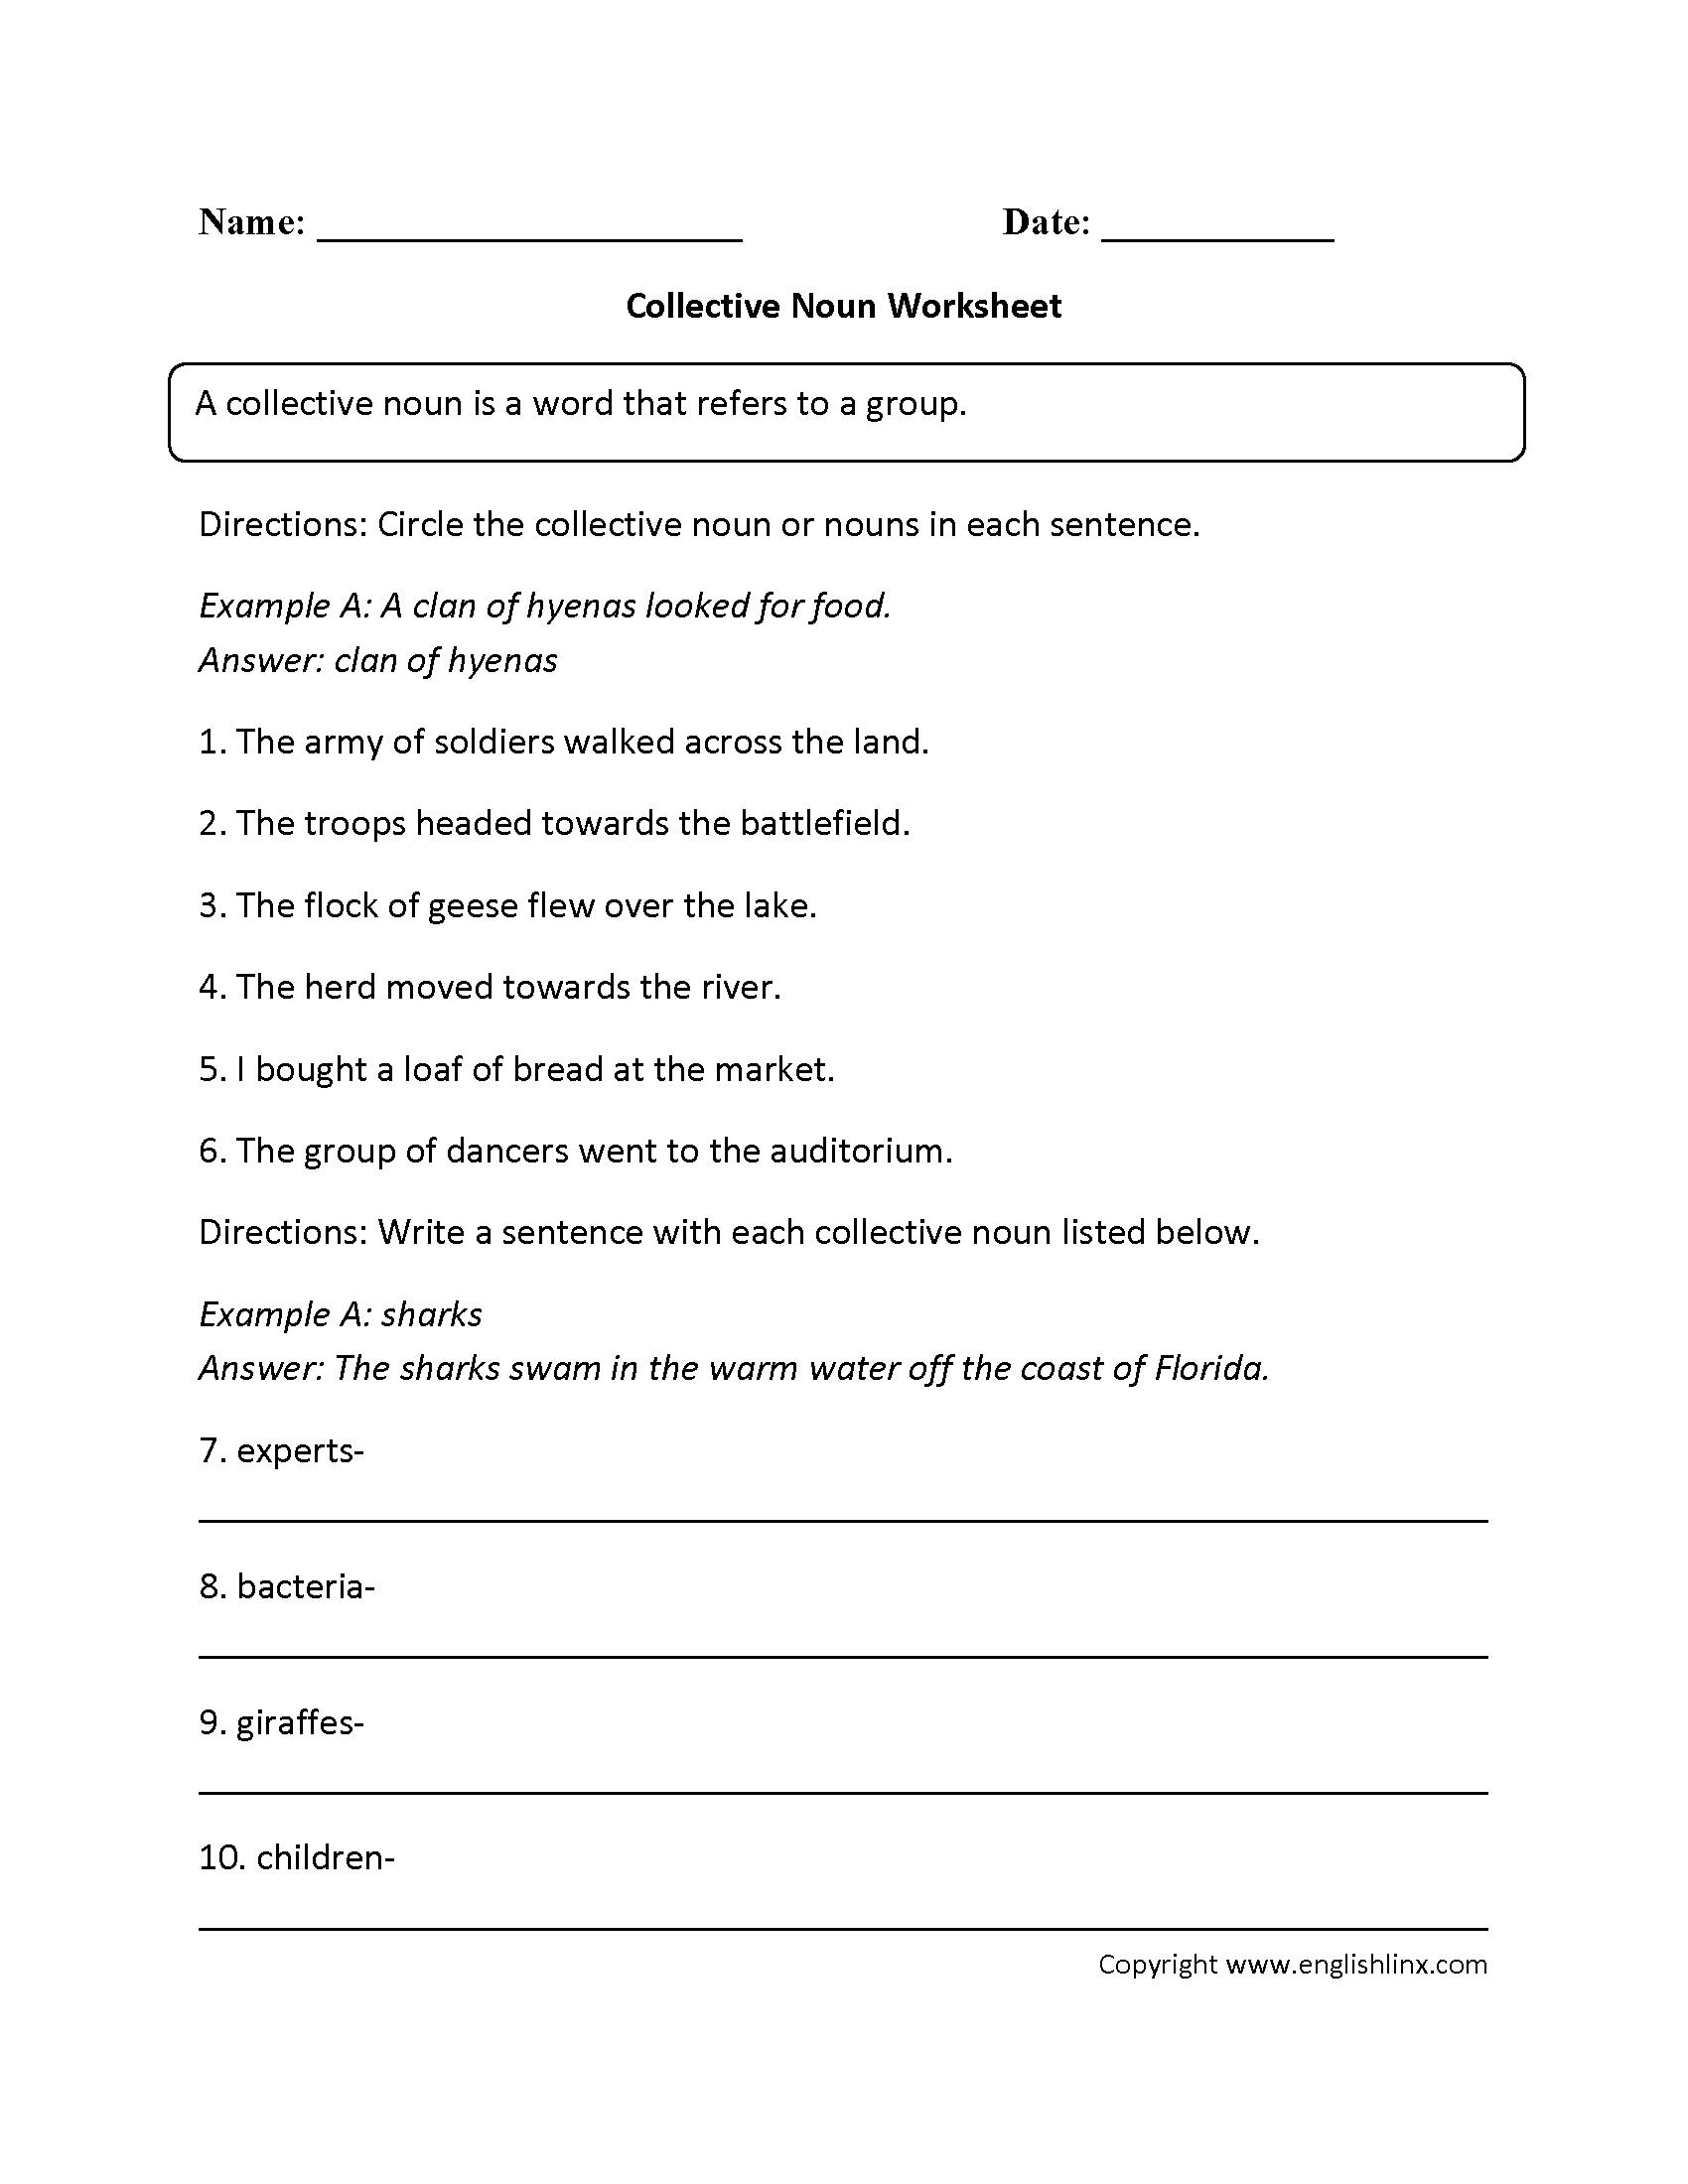 collective-nouns-complete-the-sentence-worksheet-have-fun-teaching